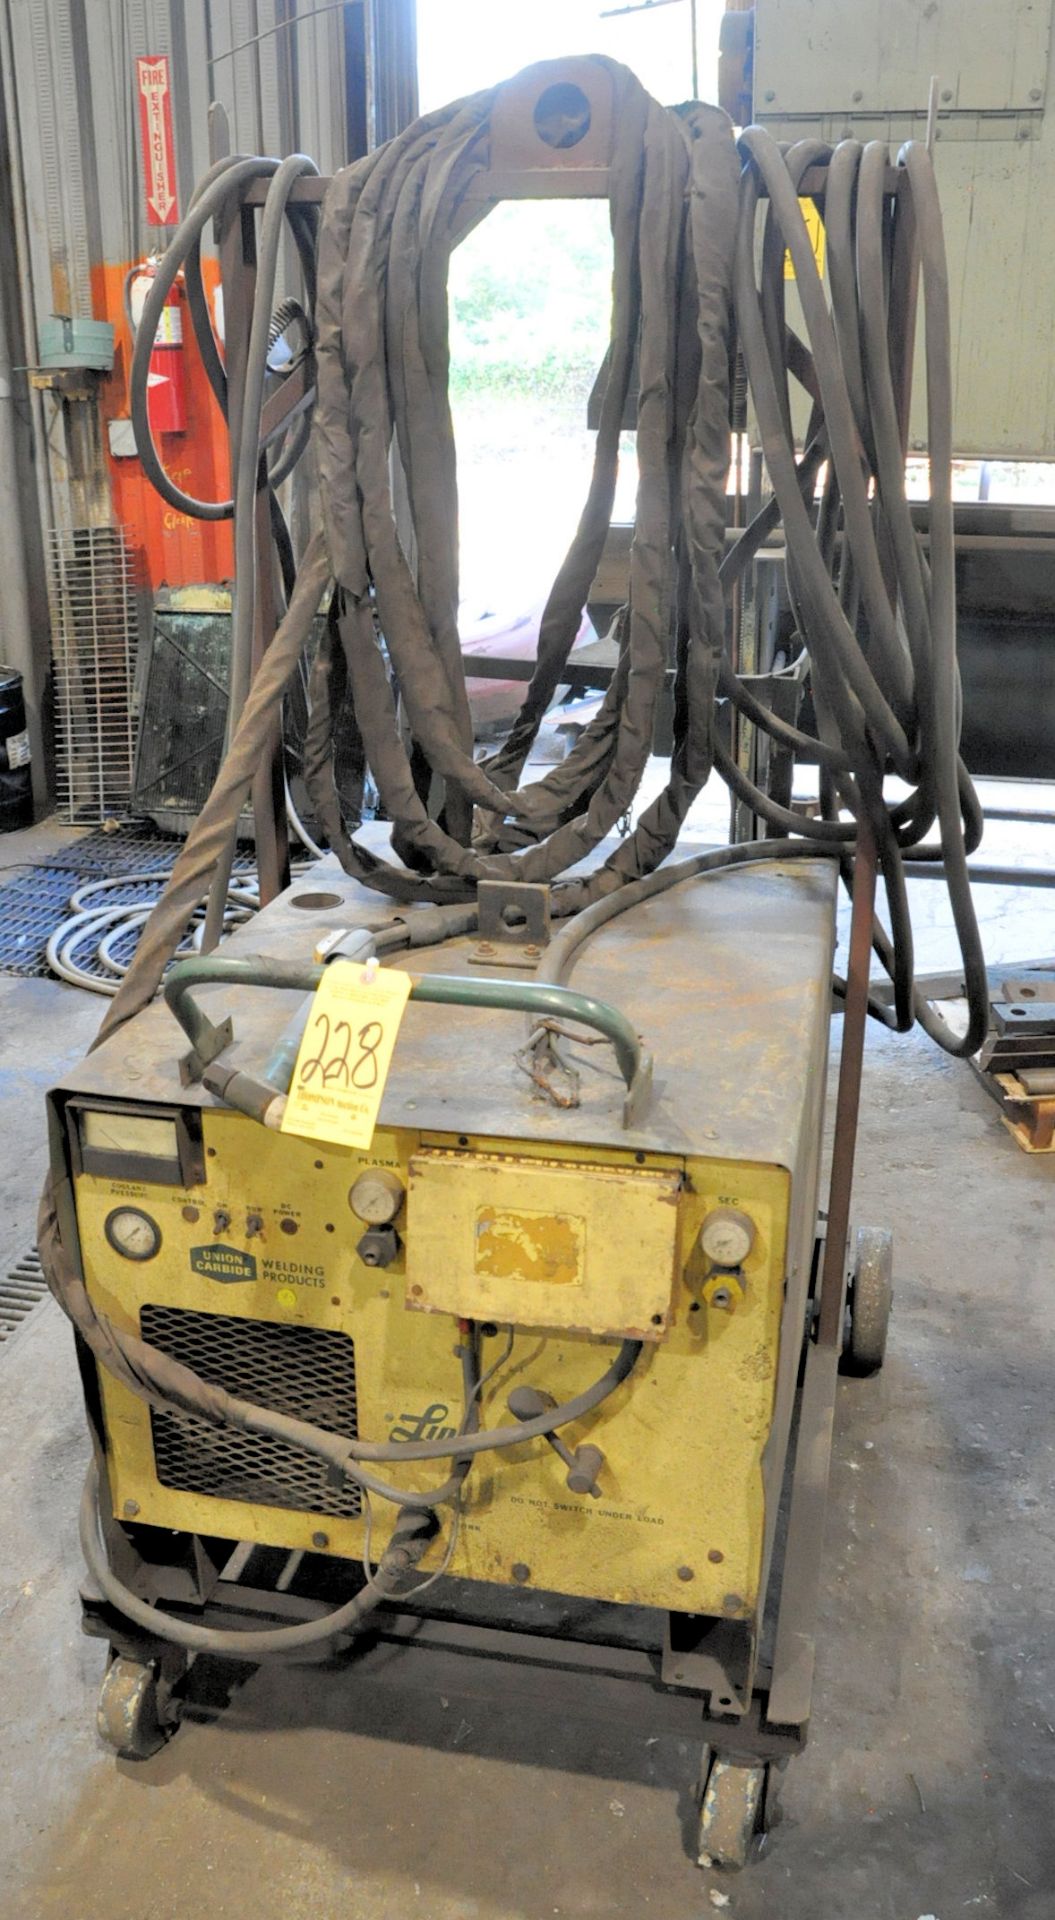 Linde Plasma Cutter System, S/n N/a, with Leads, on Wheels